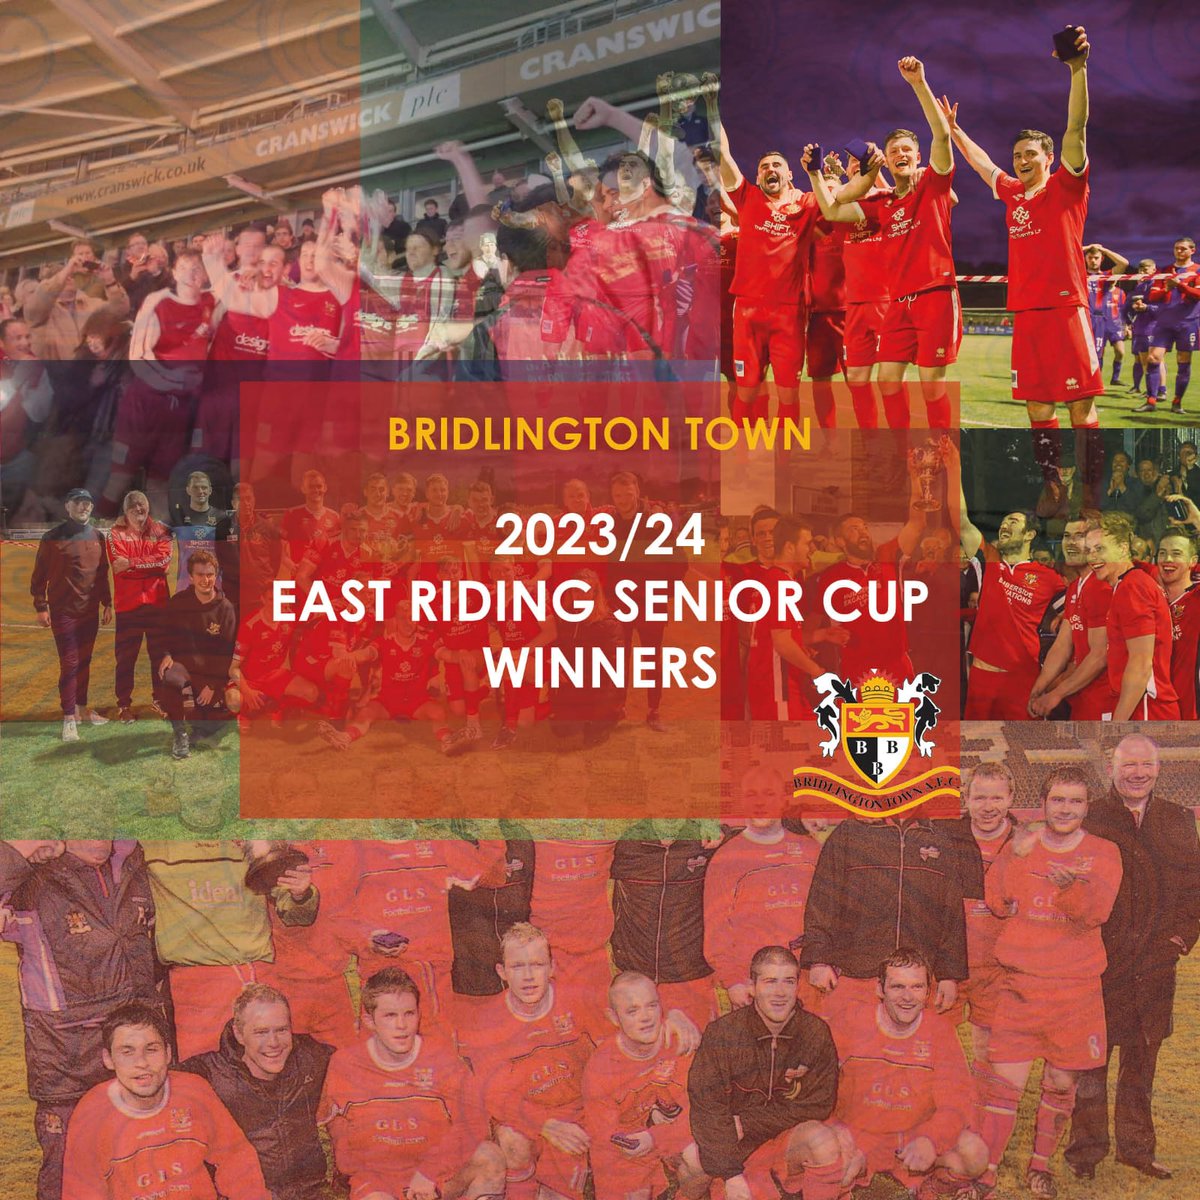 Full time North Ferriby 1 Bridlington Town 2 A goal worthy of winning any cup final from Lewis Dennison in added time. The East Riding Senior Cup is staying at Queensgate!